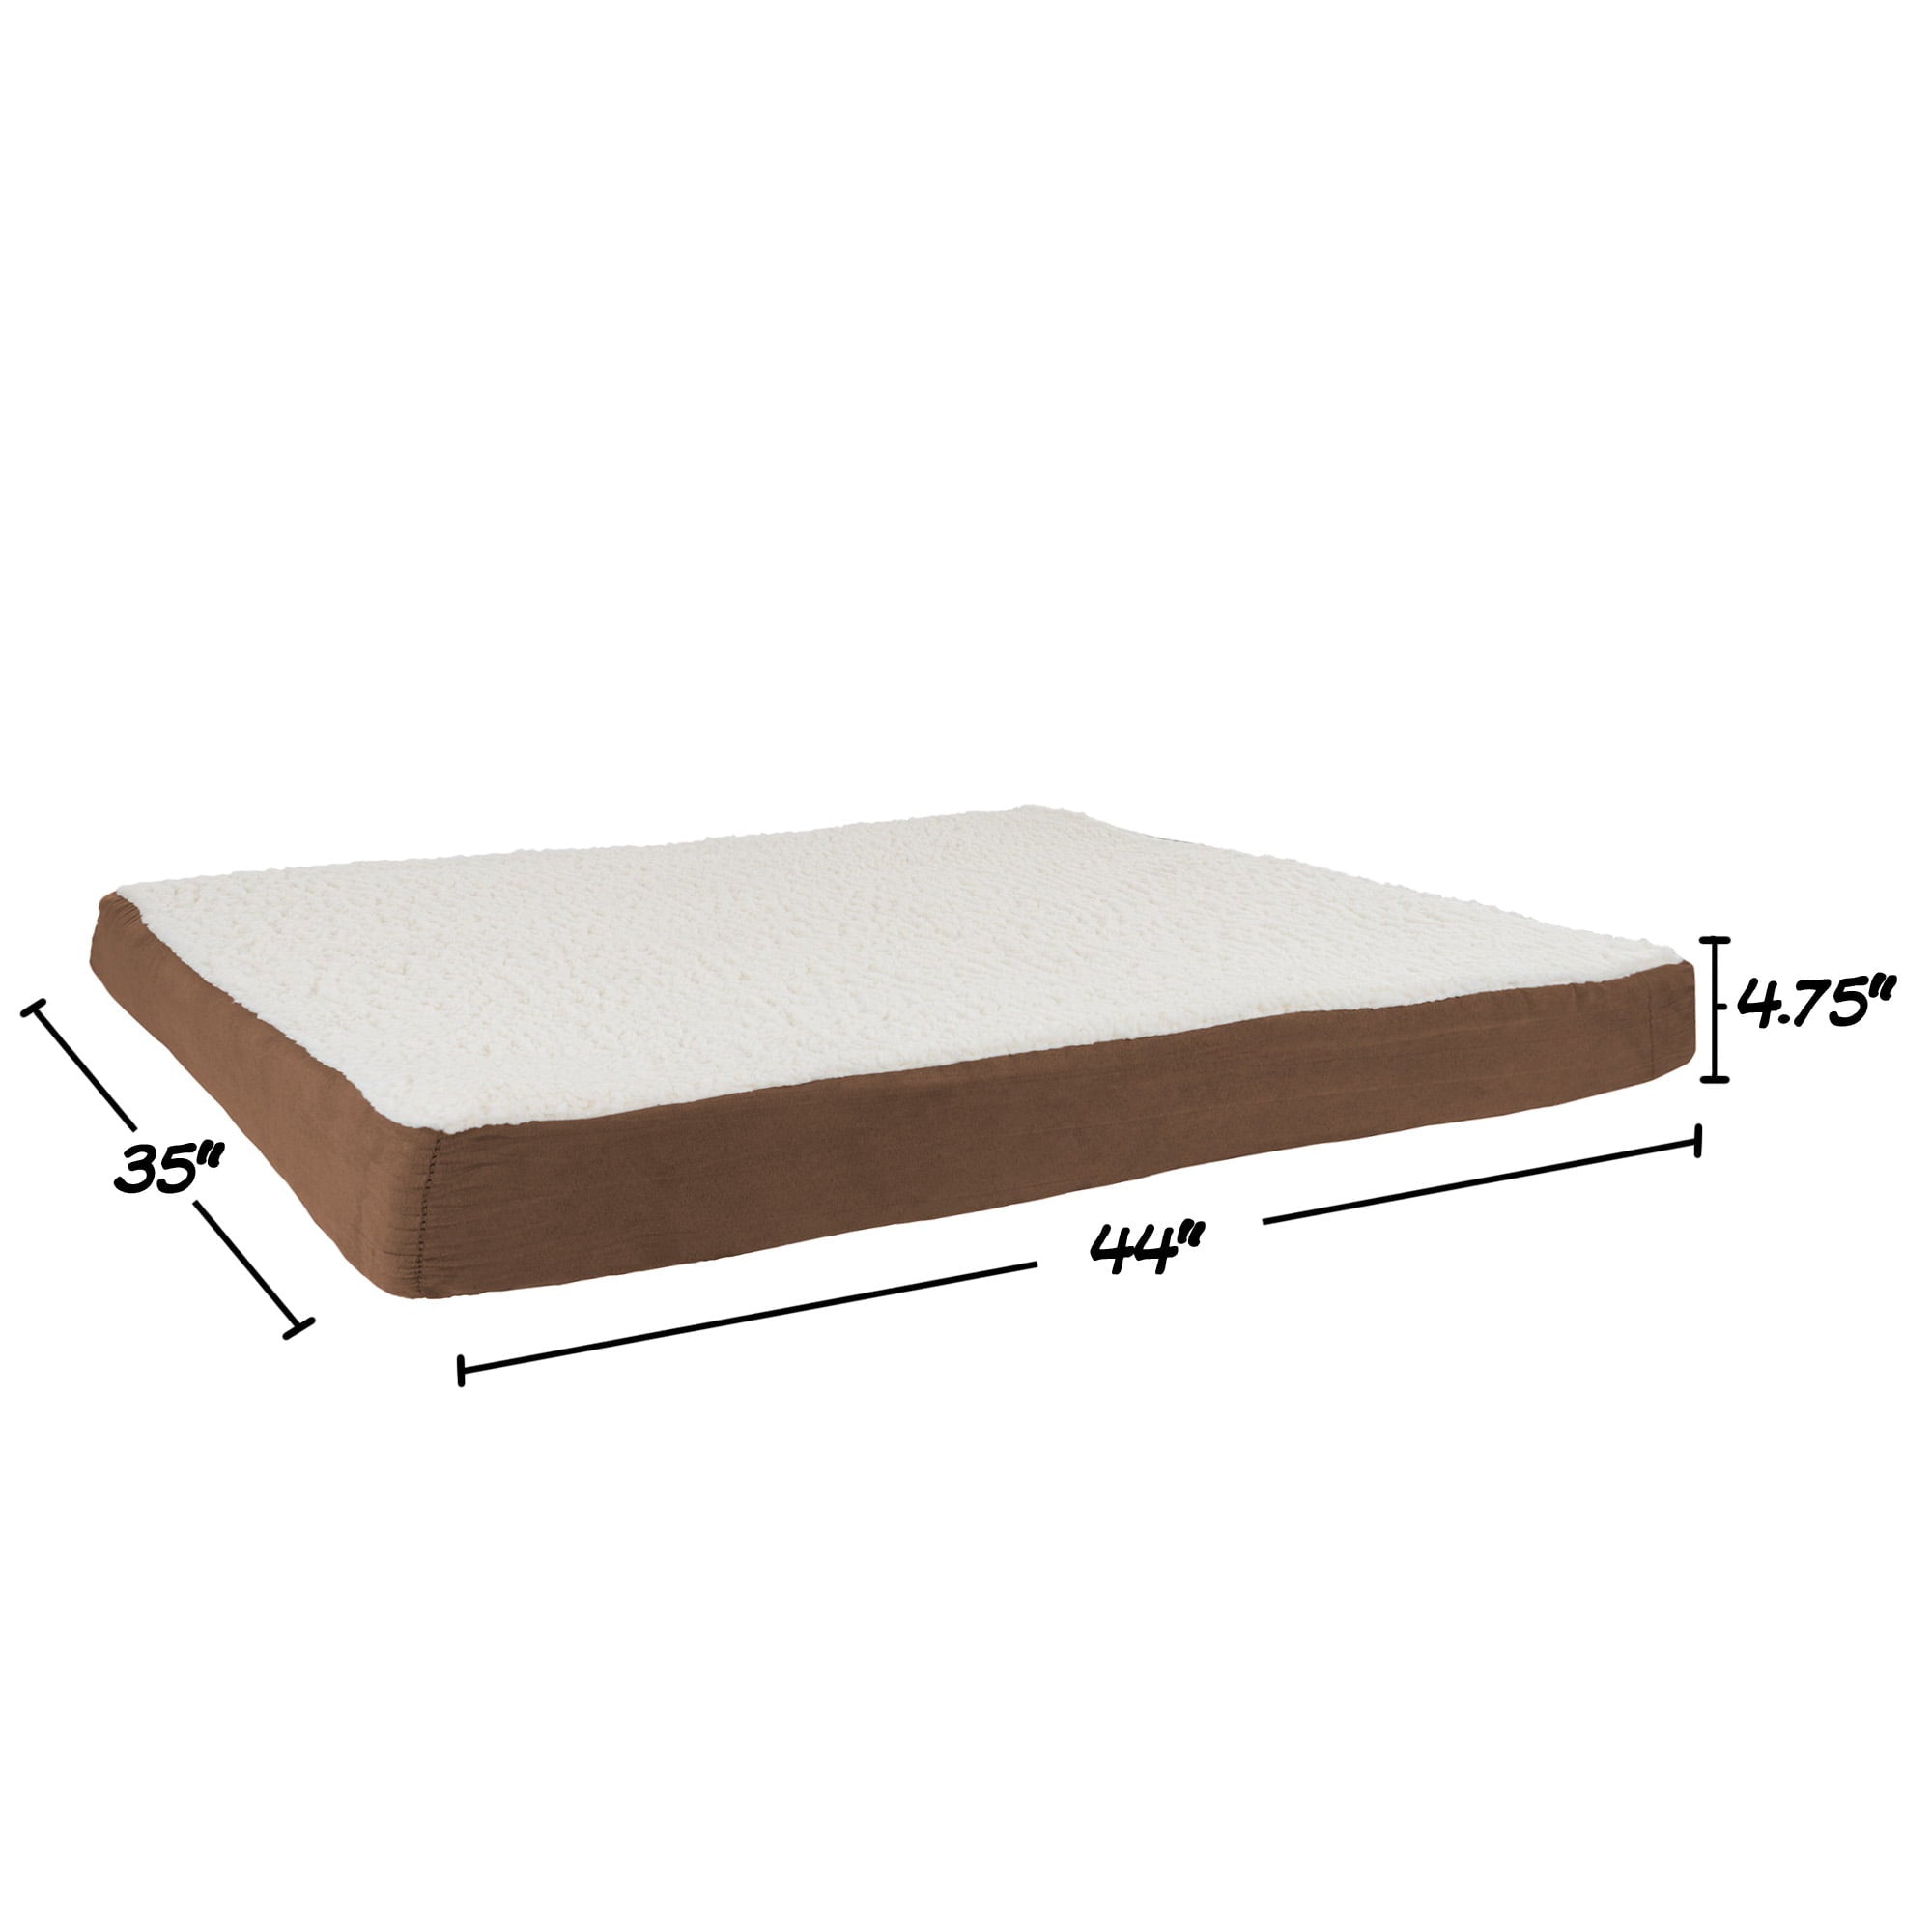 Orthopedic Dog Bed – 2-Layer Memory Foam Dog Bed with Machine Washable Sherpa Top Cover – 44x35 Dog Bed for Large Dogs up to 100lb by Petmaker (Brown)